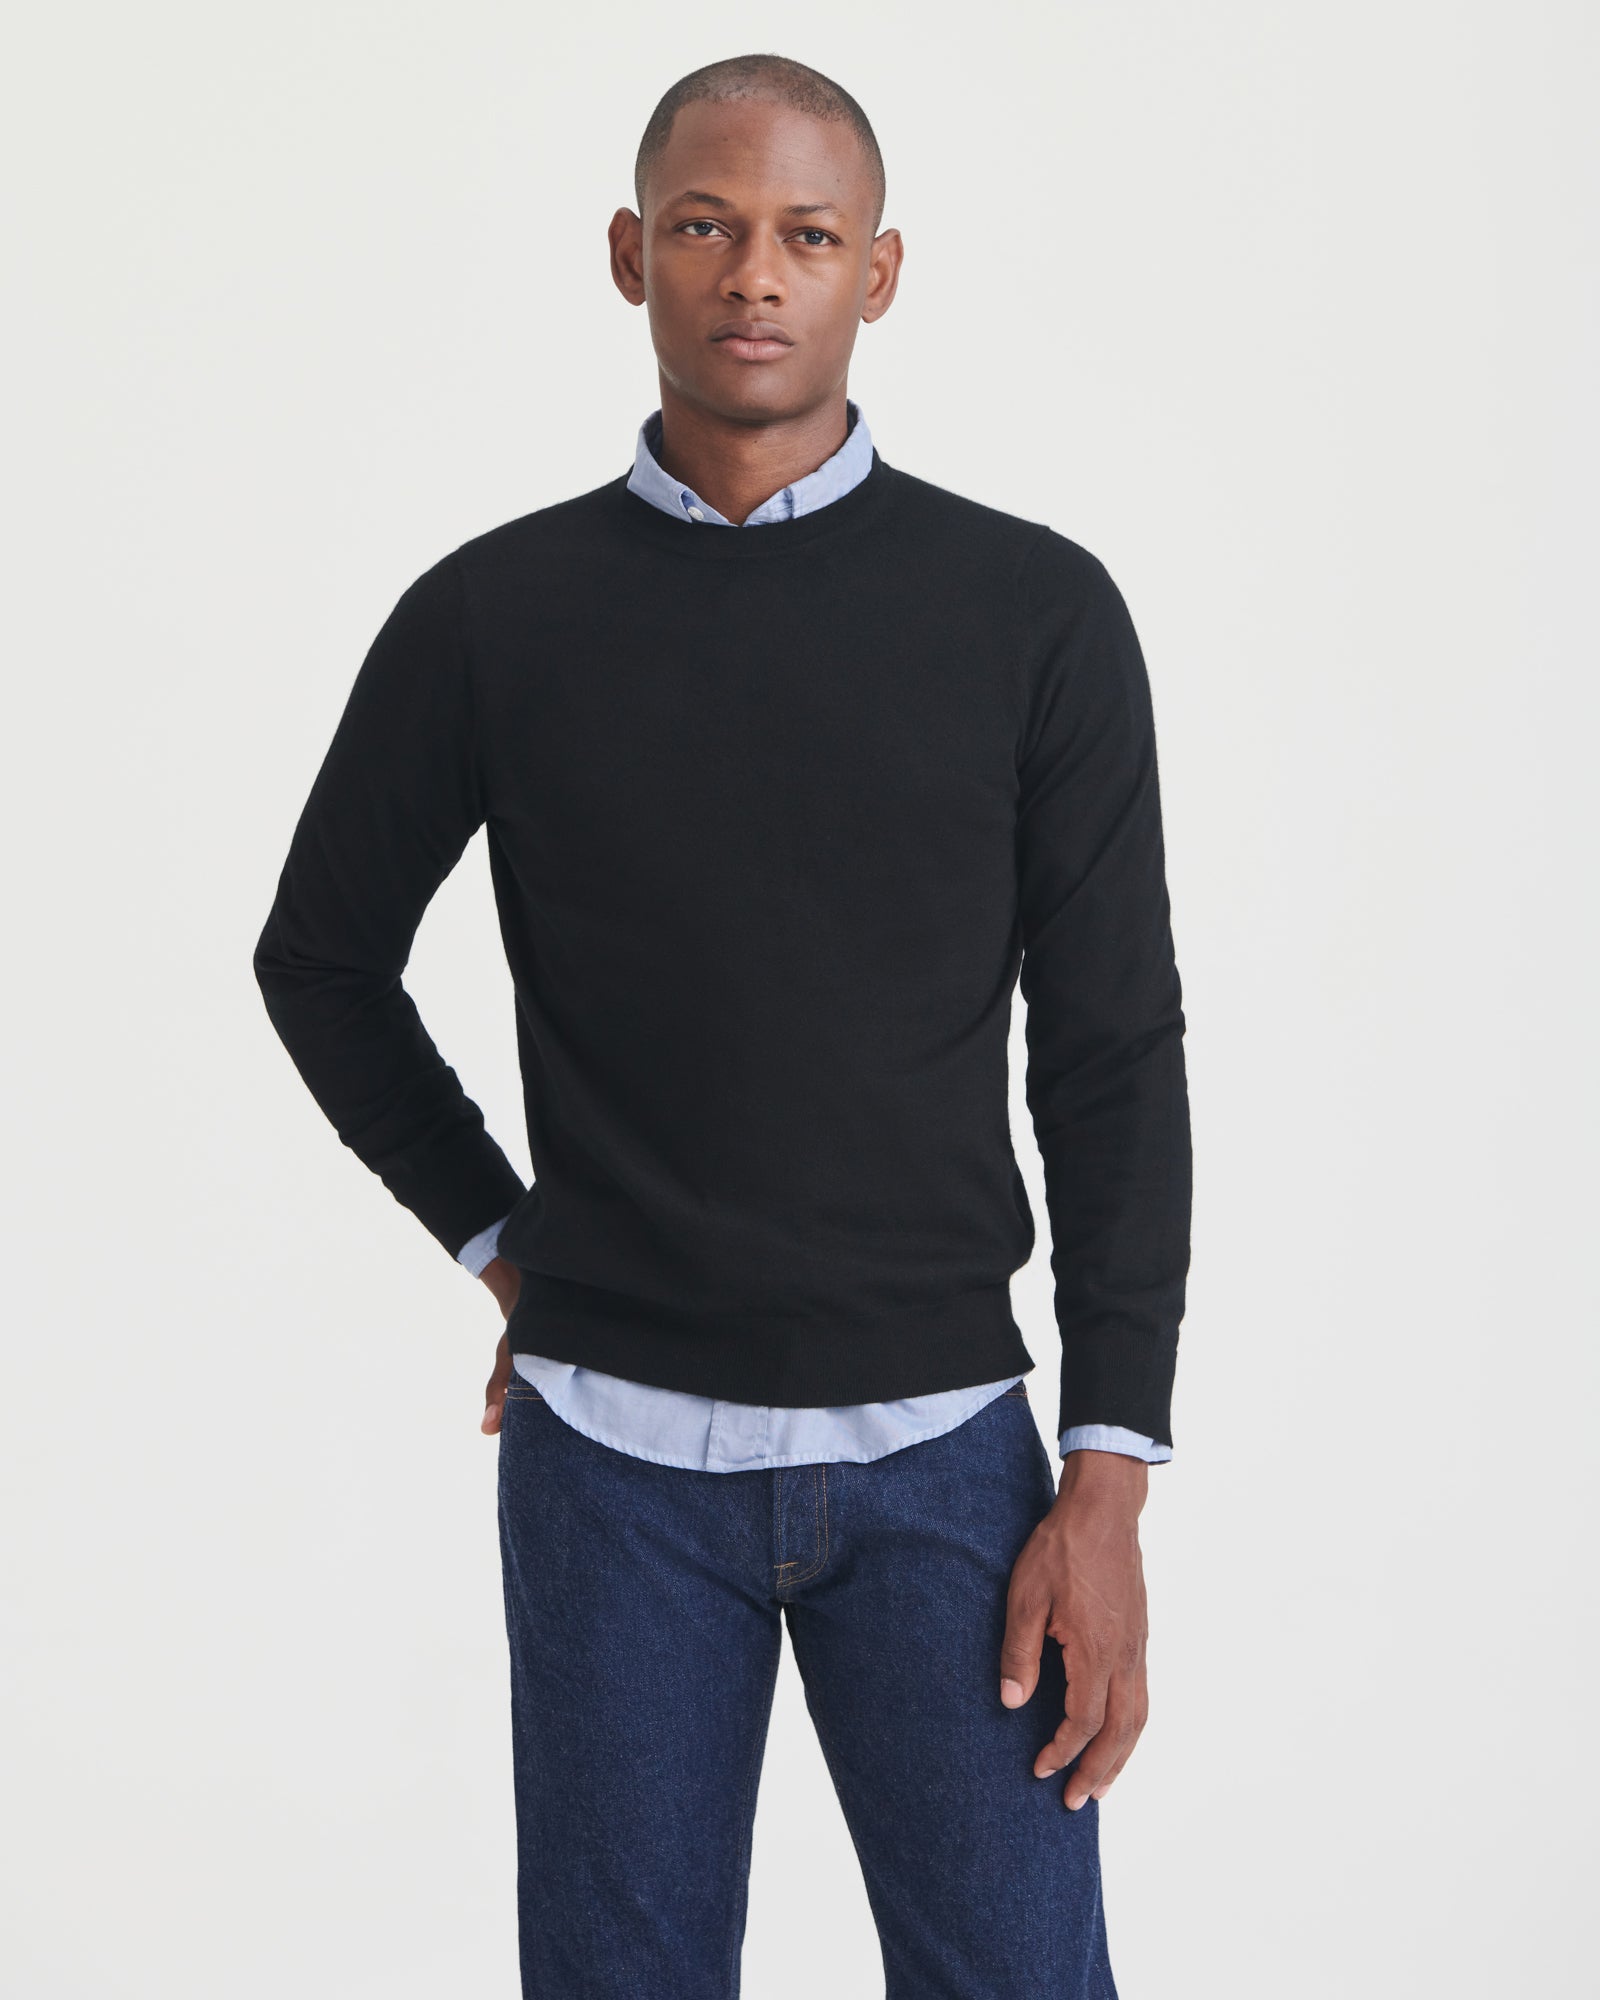 extreme cashmere crew-neck sweater n°167 please – 100% cashmere